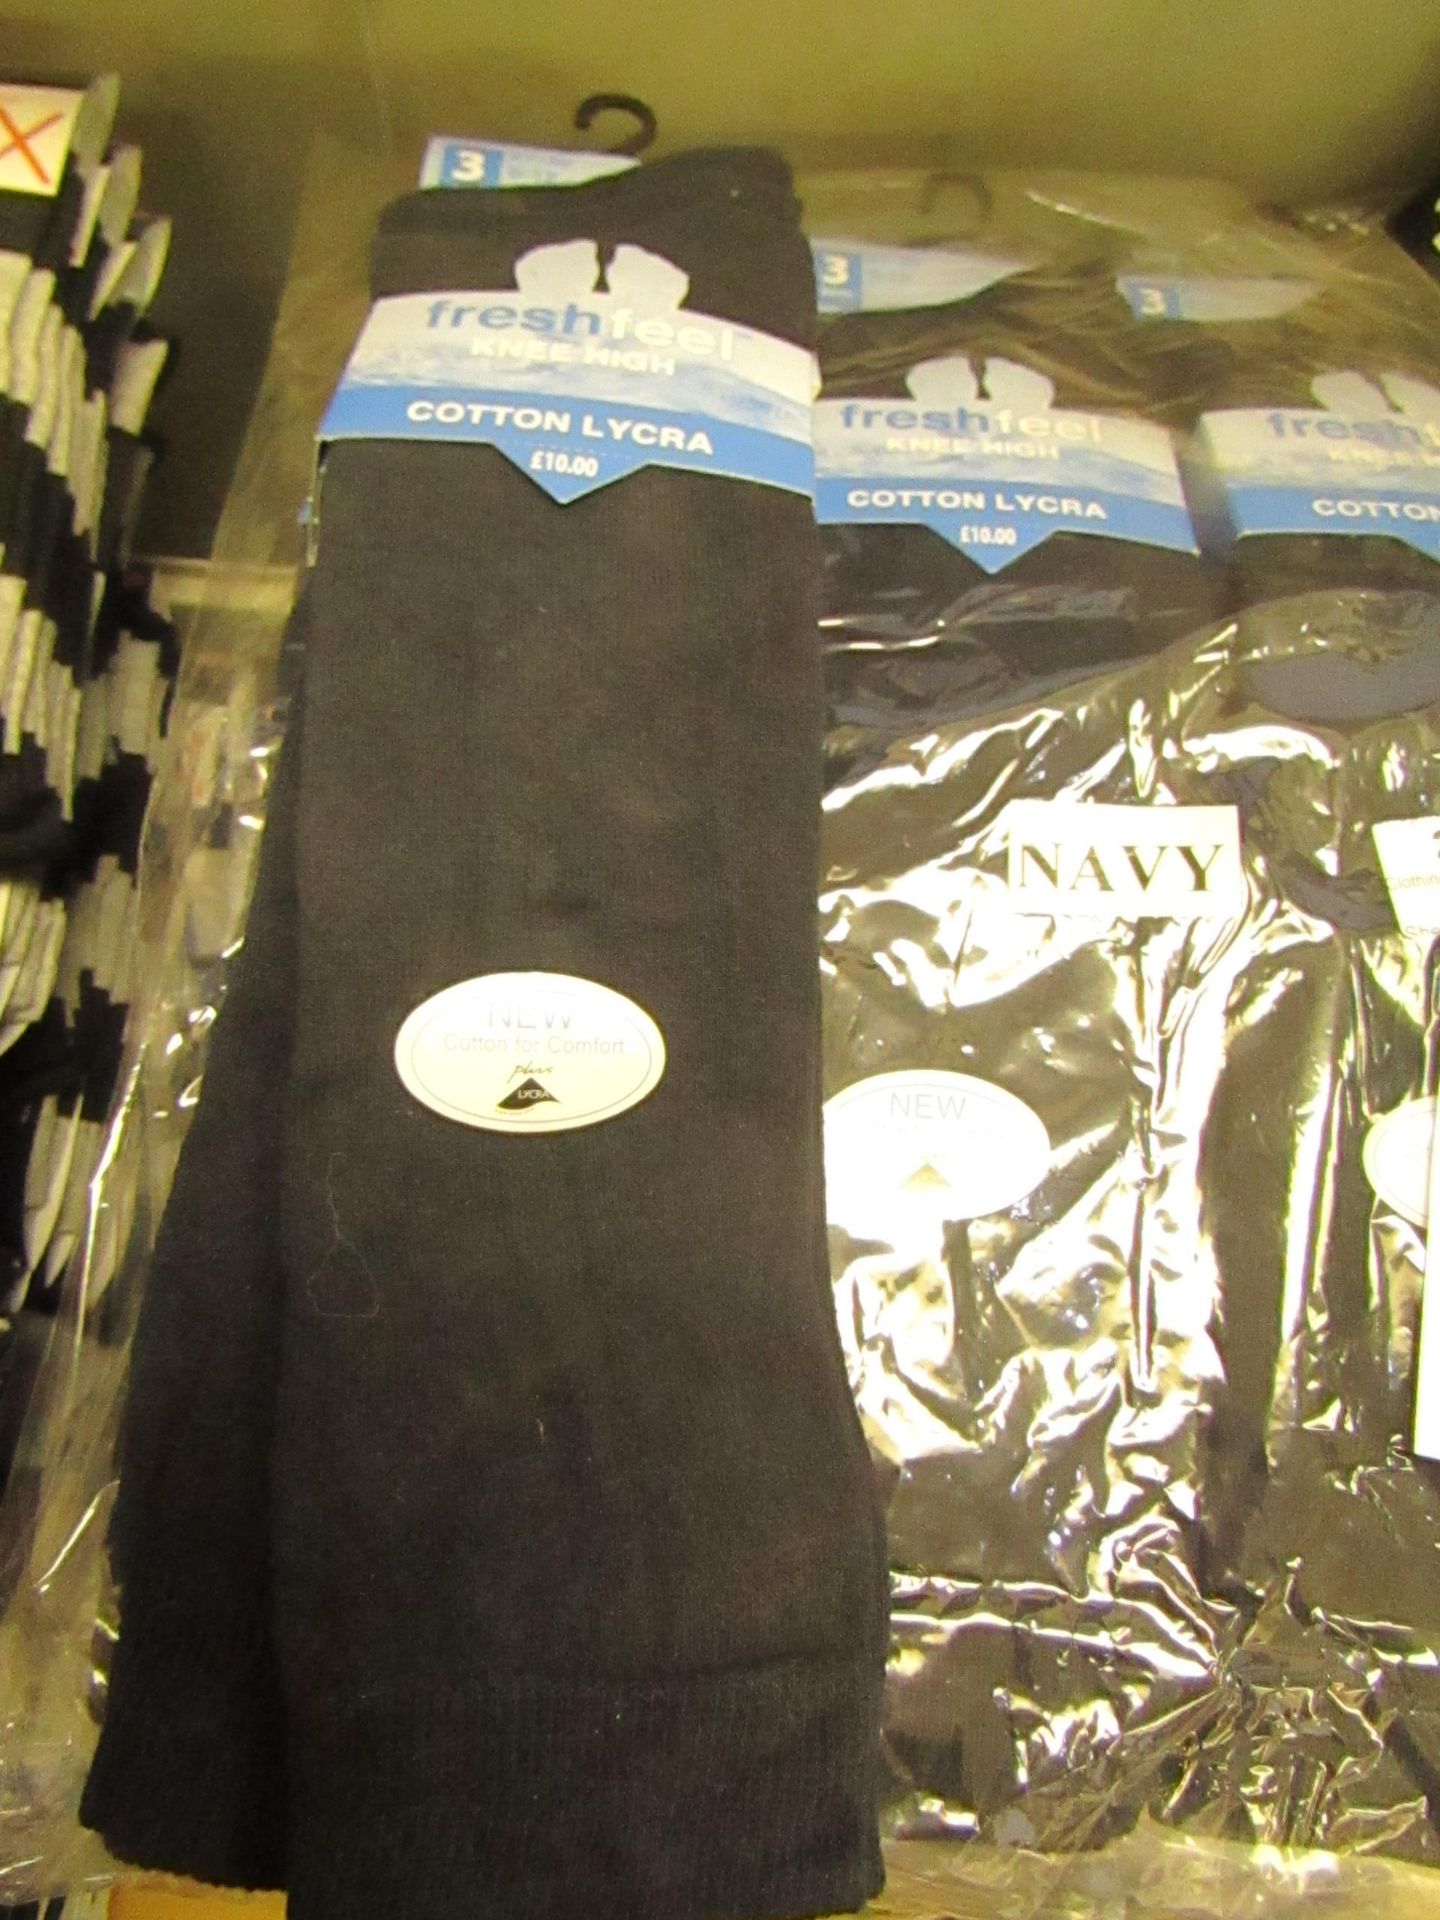 12 X Pairs of Girls Knee High Socks Navy Size 9 to 12 New & Packaged